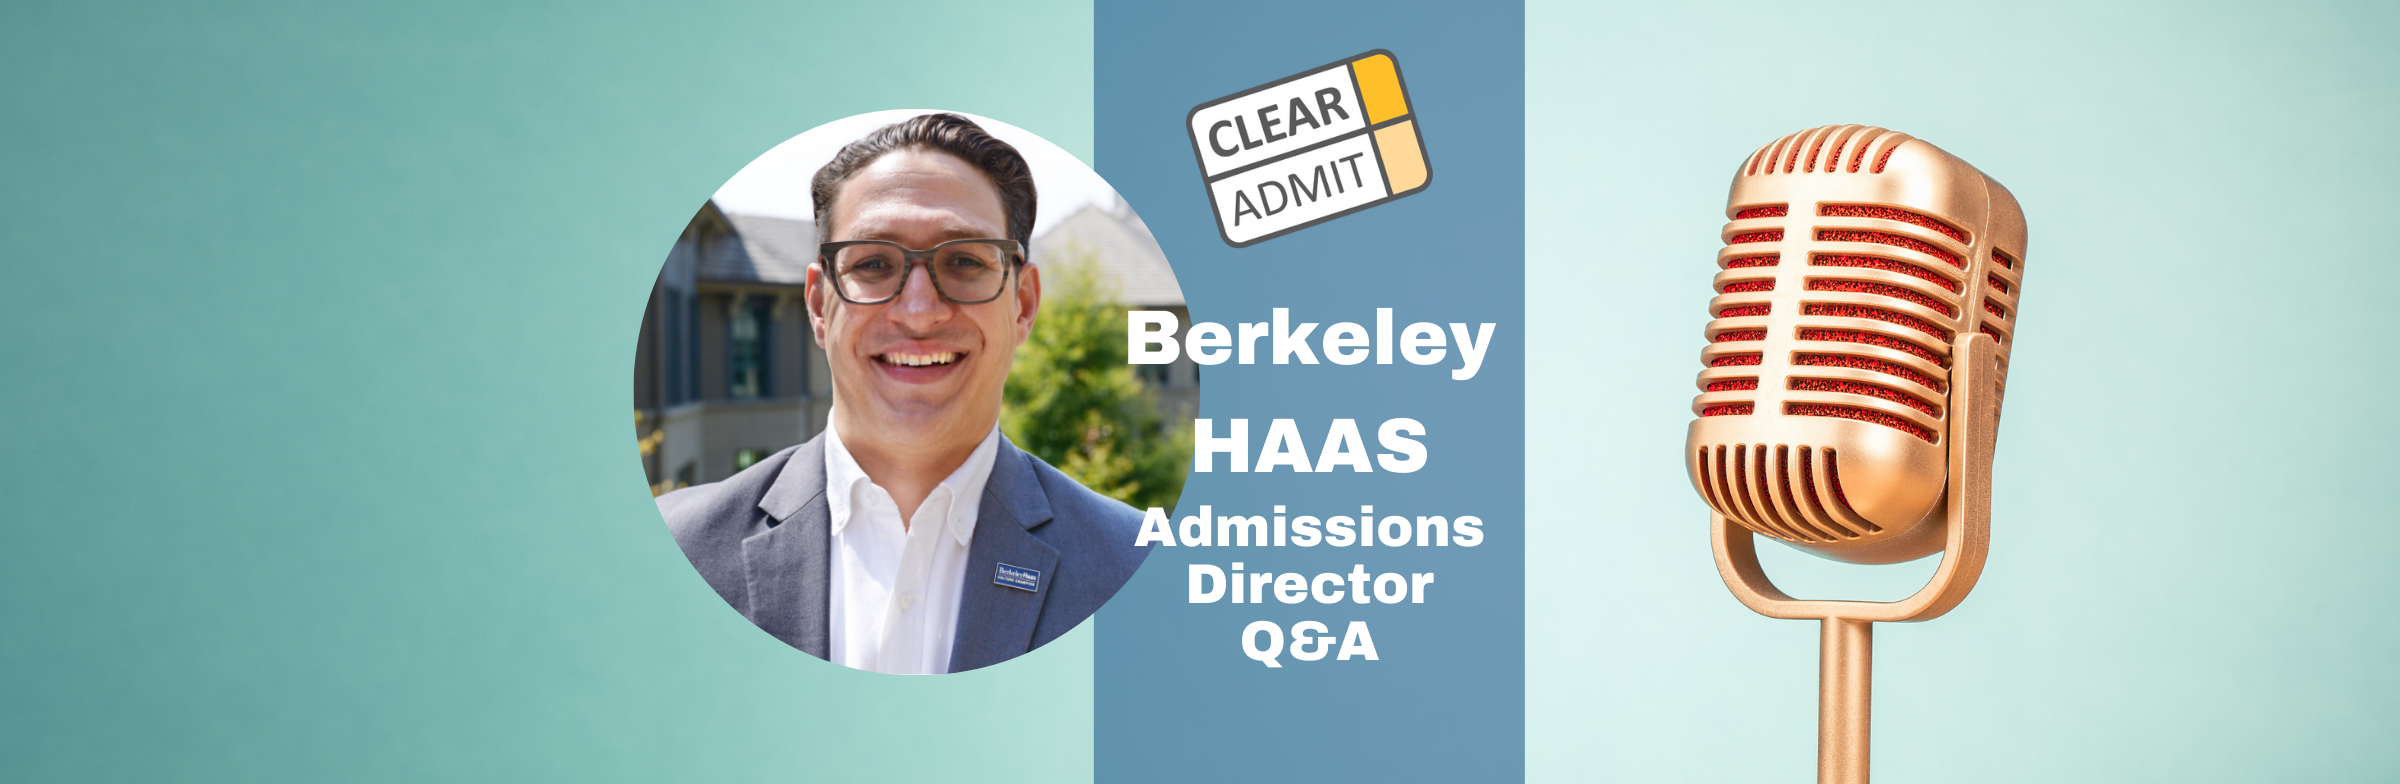 Image for Admissions Director Q&A: Eric Askins of Berkeley’s Haas School of Business